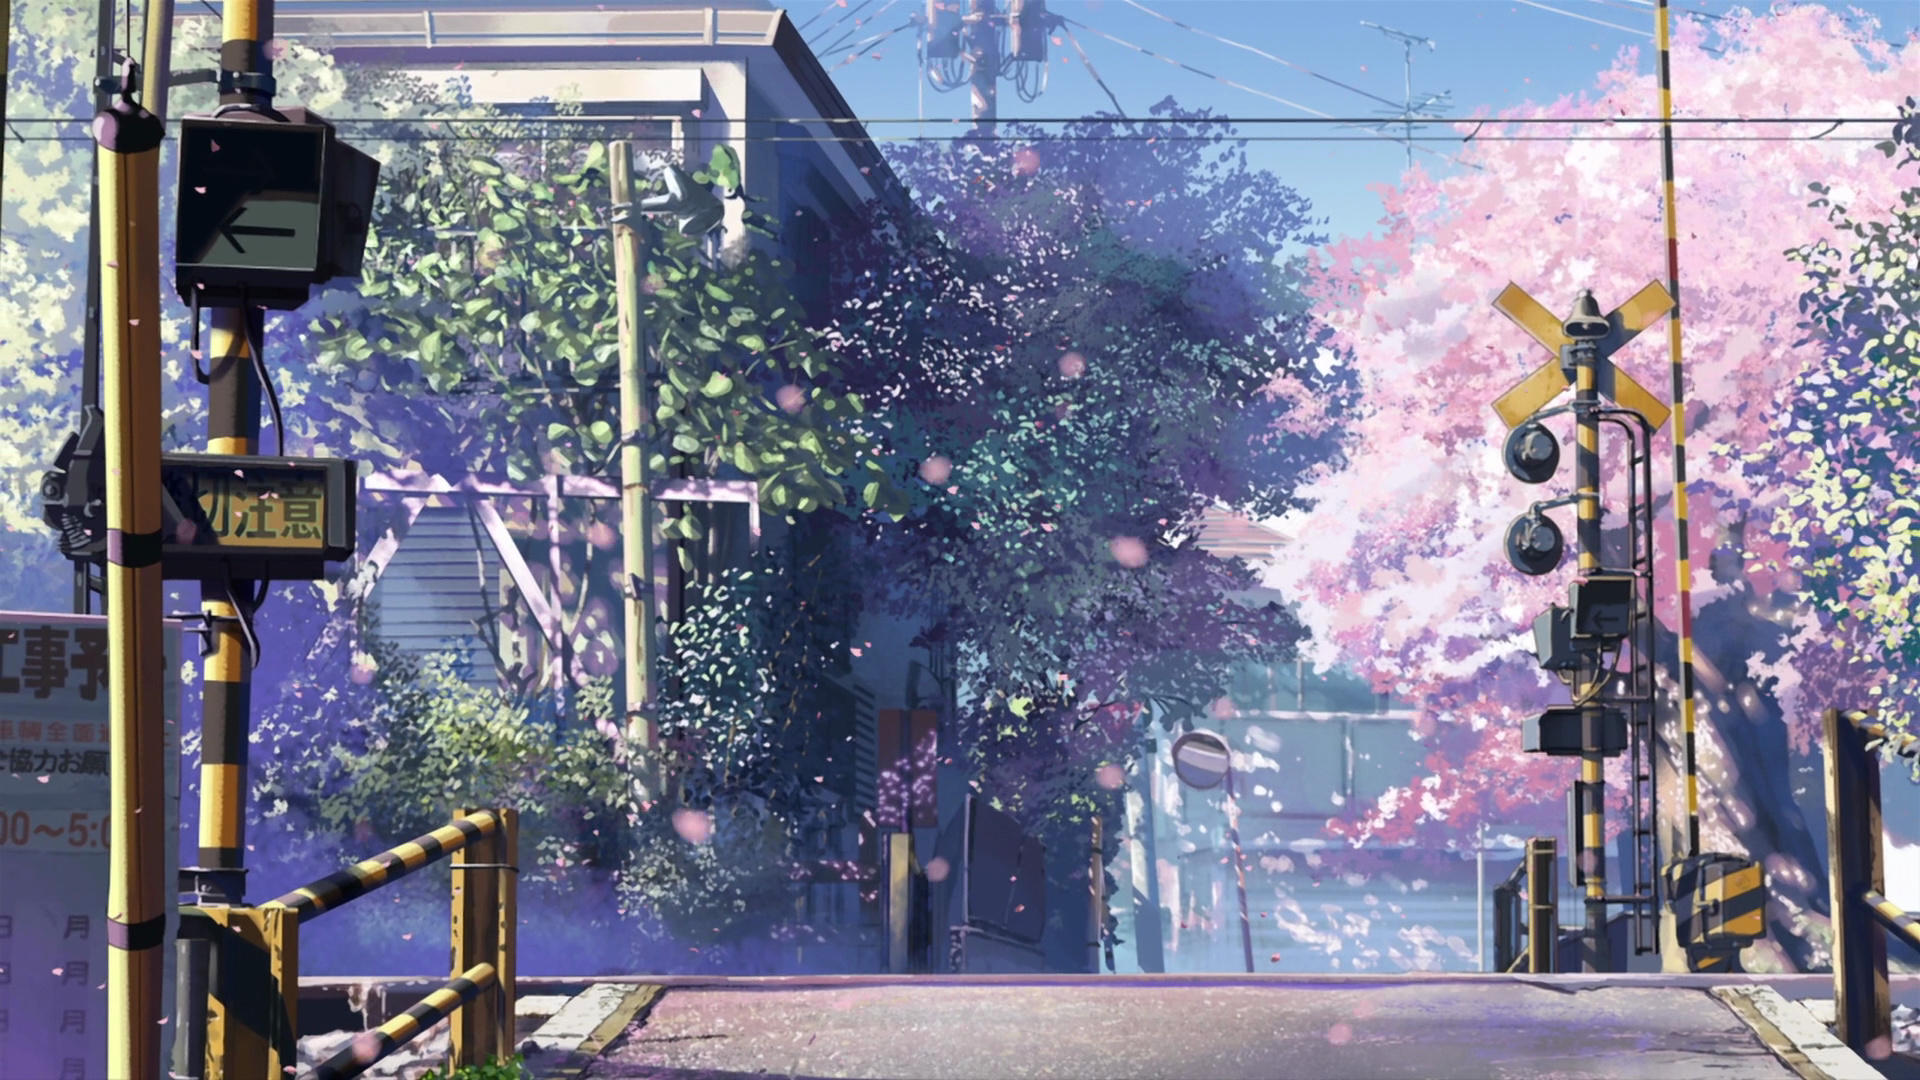 Amazing 5 Centimeters Per Second Pictures & Backgrounds